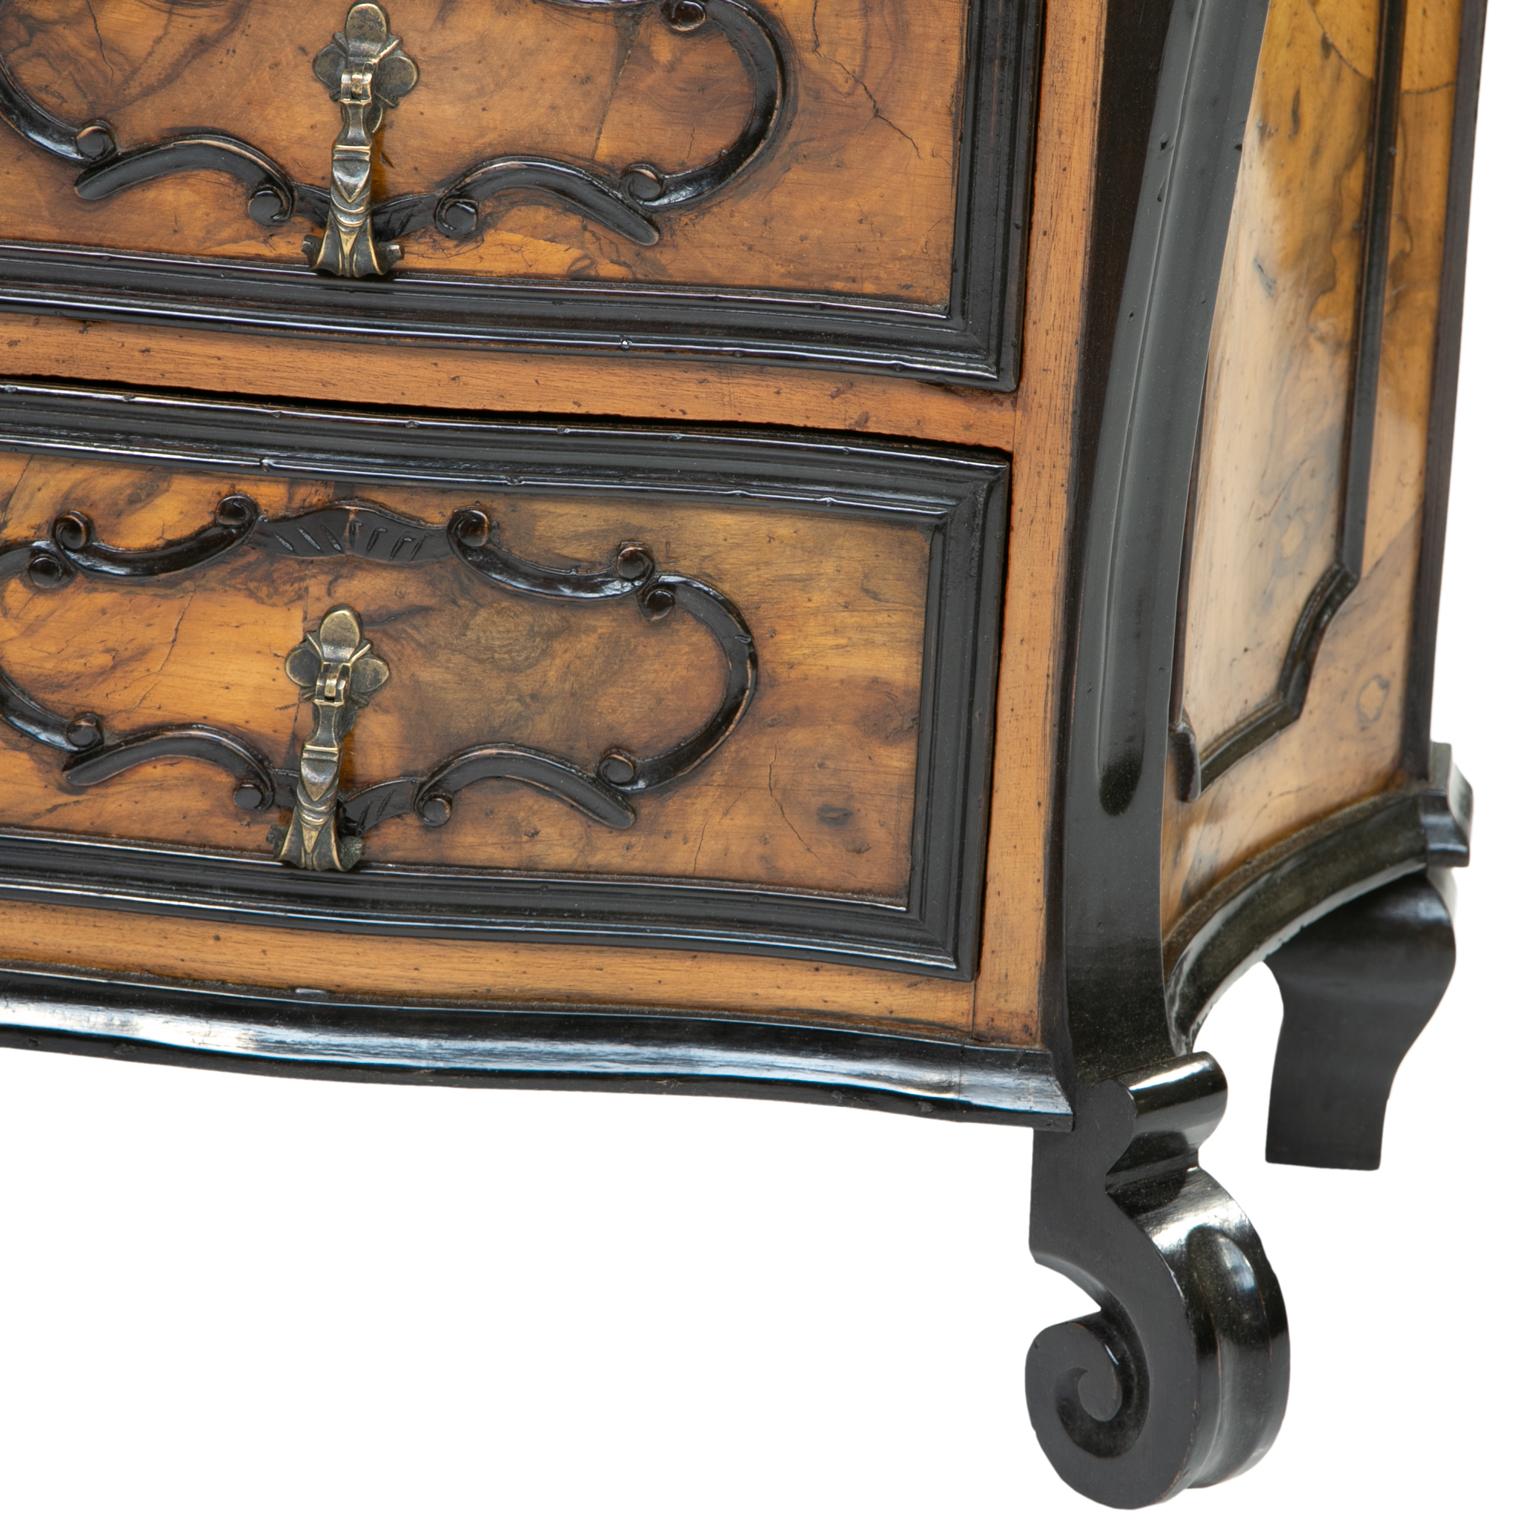 A pair of burl wood side chest of drawers. These chests are petite in size. The chests are quality reproductions made from old wood and in the style of furniture from Milan. They have ebonized wood accents and burl olive wood patched veneer. A